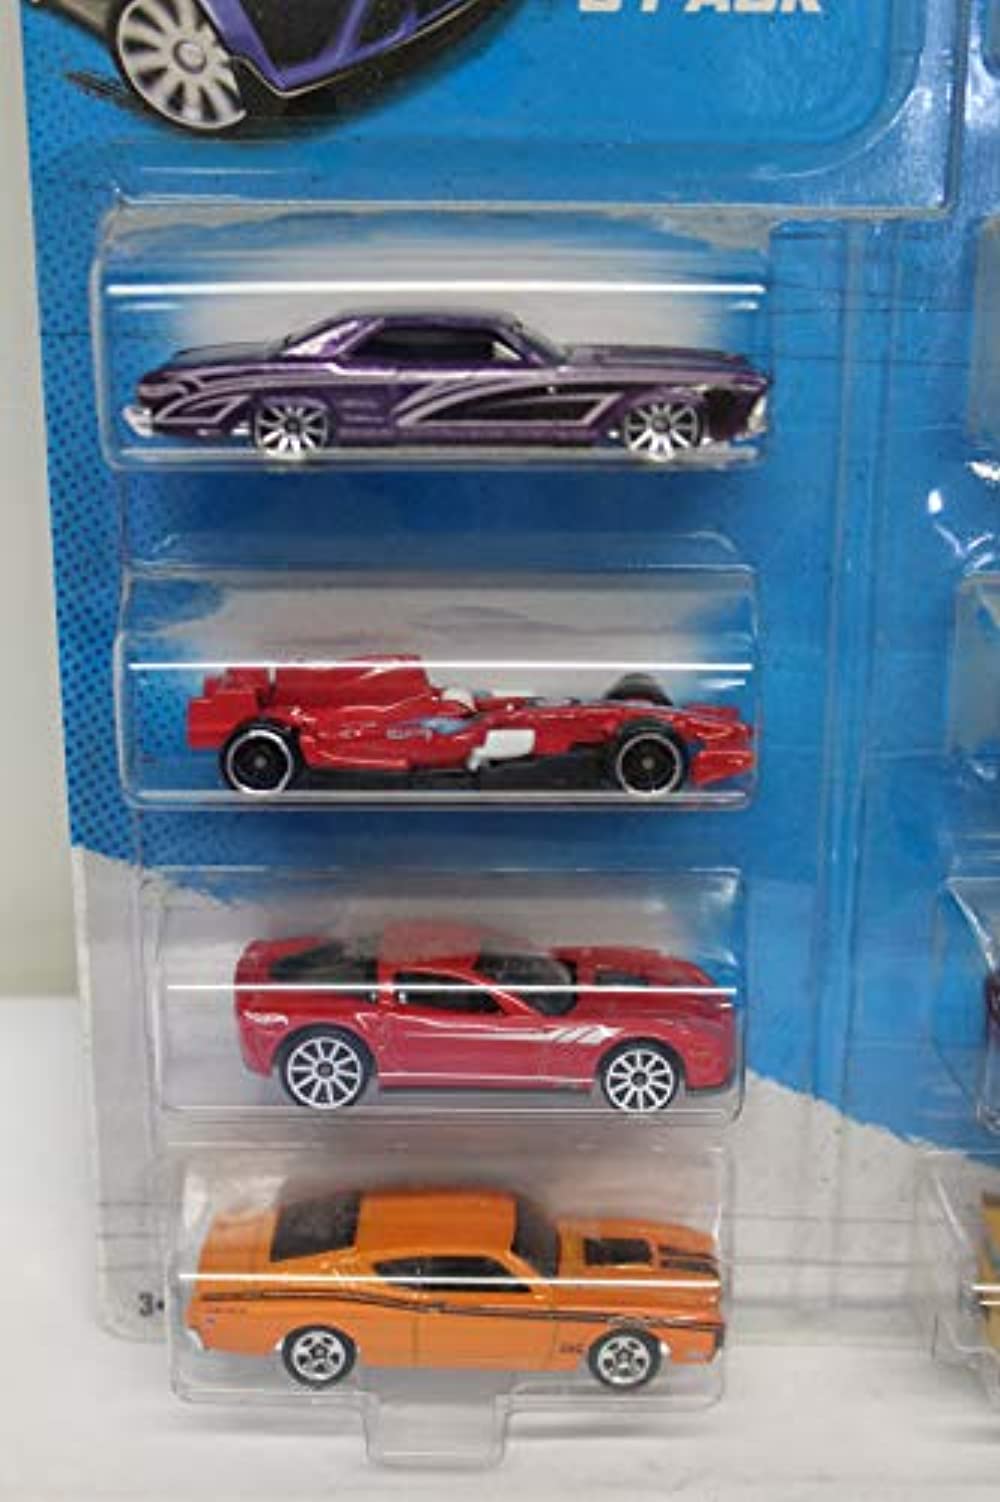 Hot Wheels 9 Pack - image 3 of 3